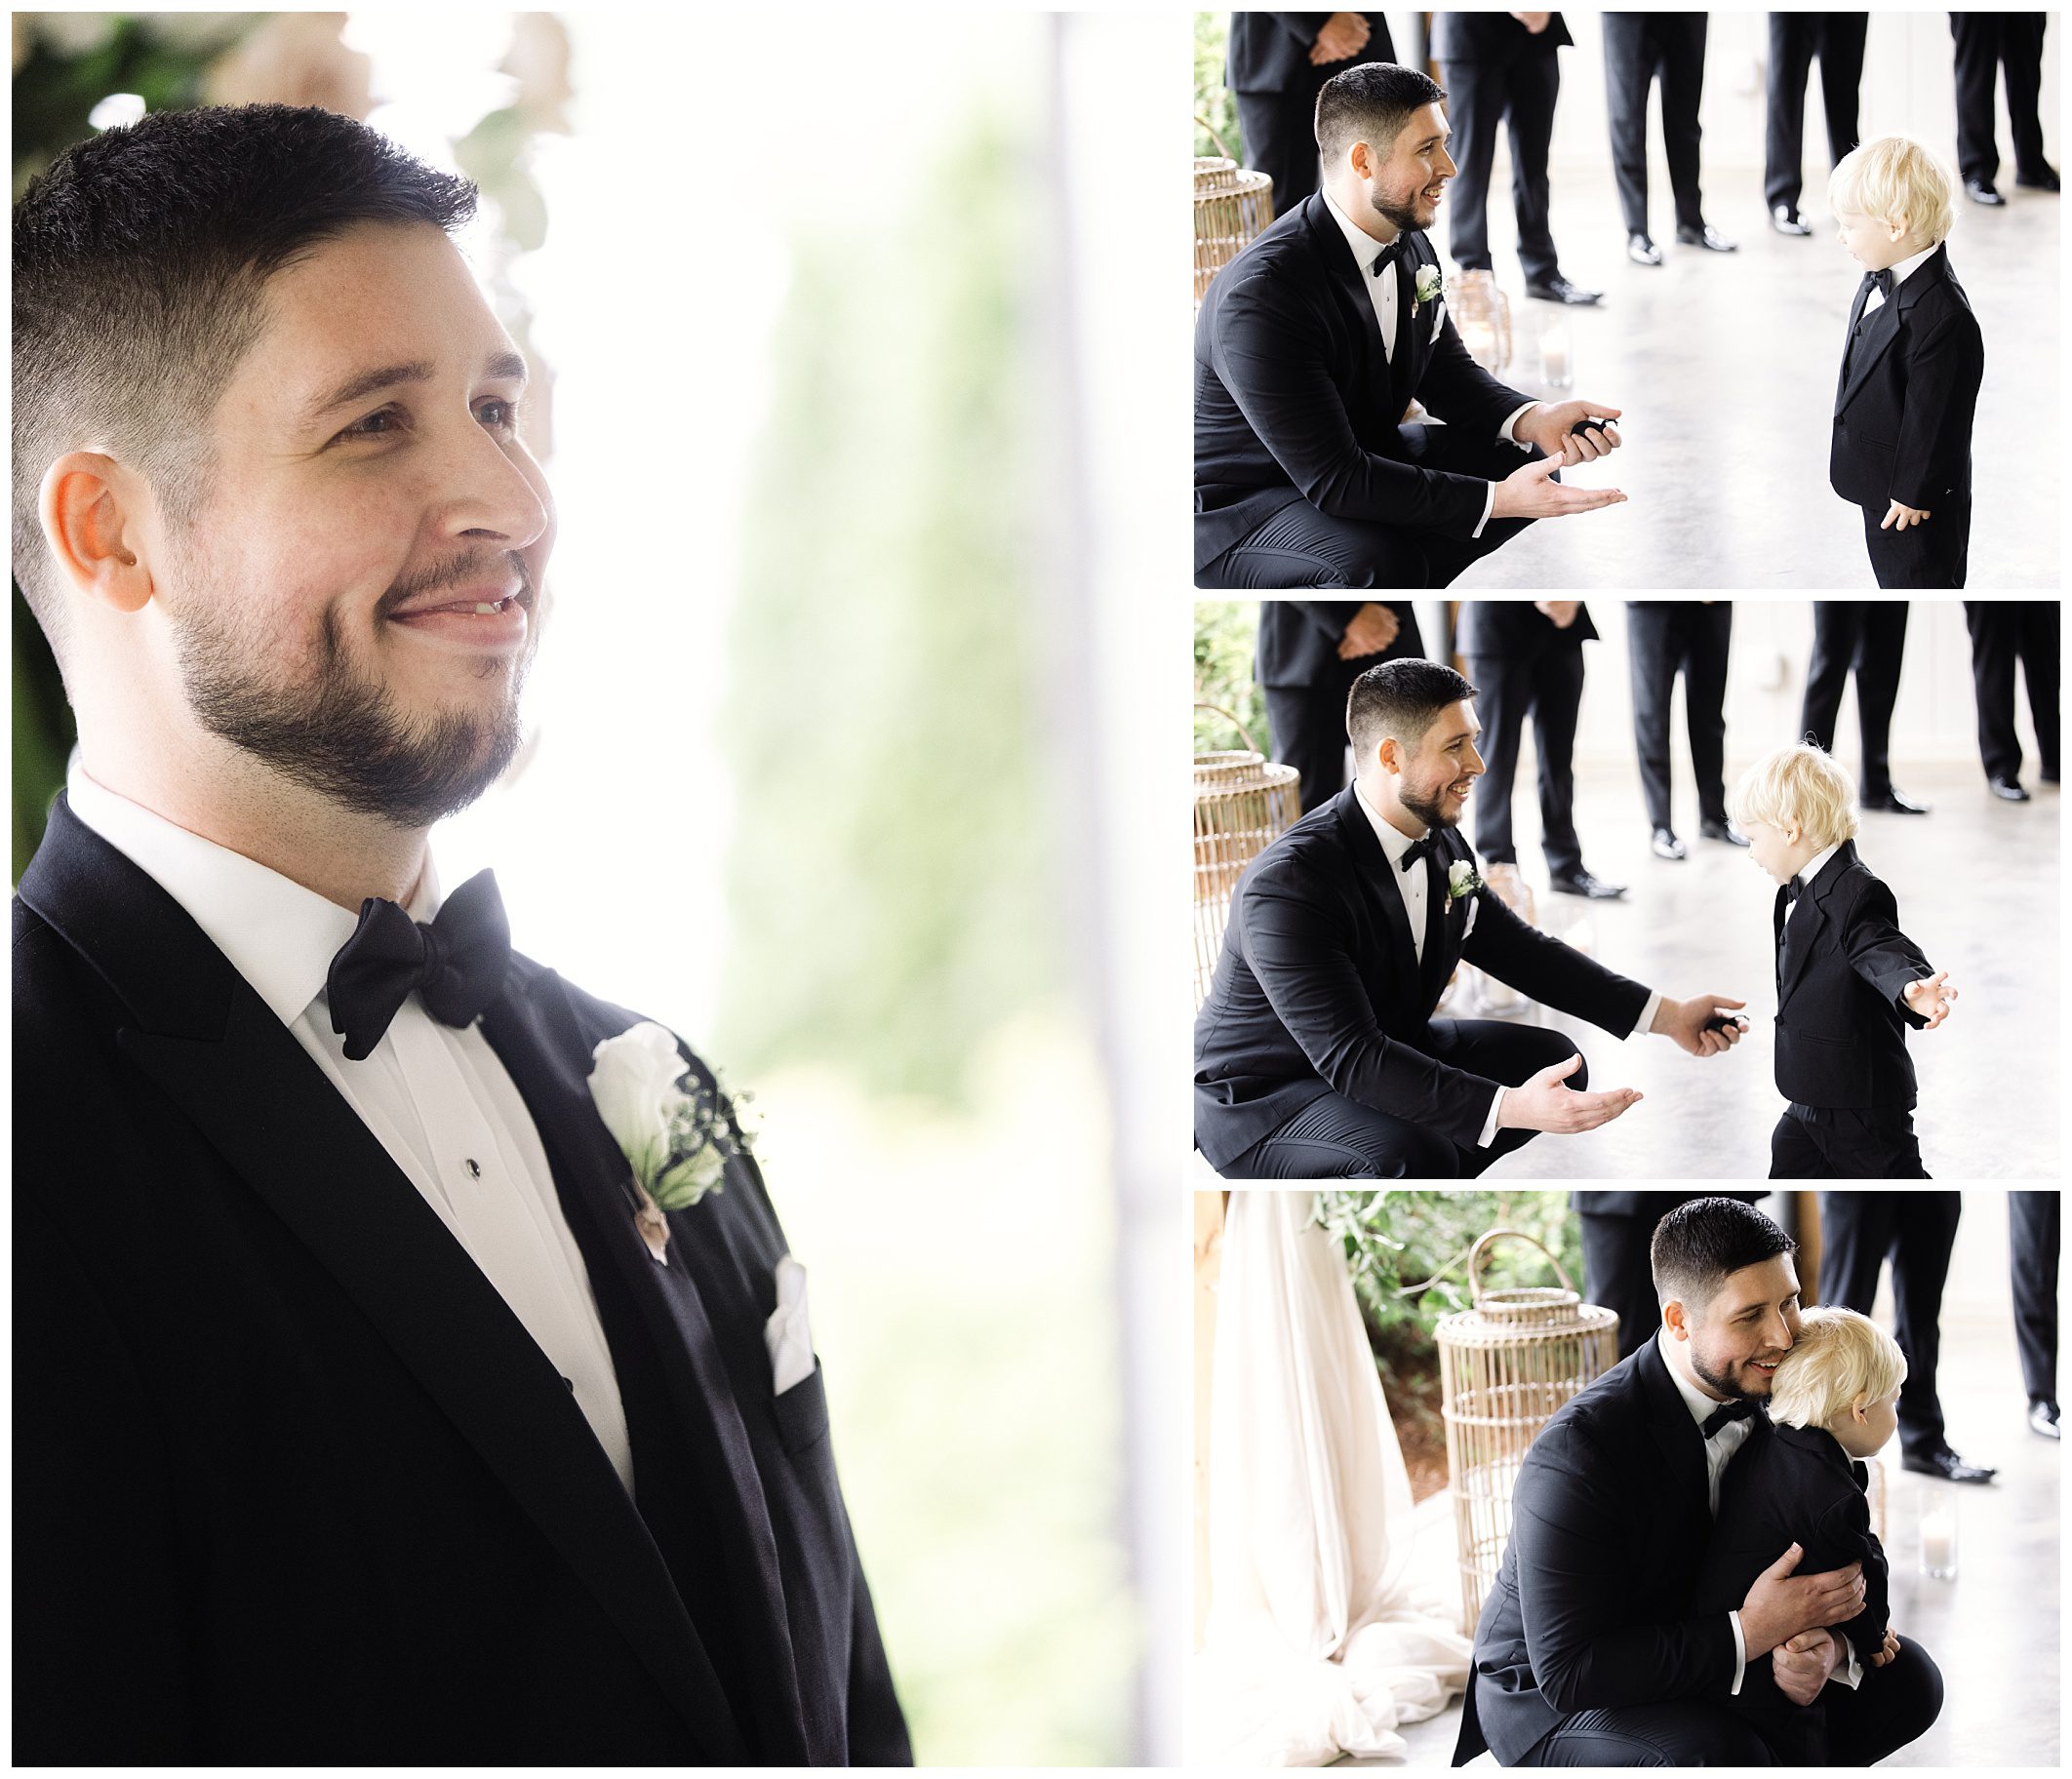 A collage of photos at a mountain wedding: a smiling groom in a tuxedo, greeting a young boy in a matching suit, and embracing him in a heartfelt hug.